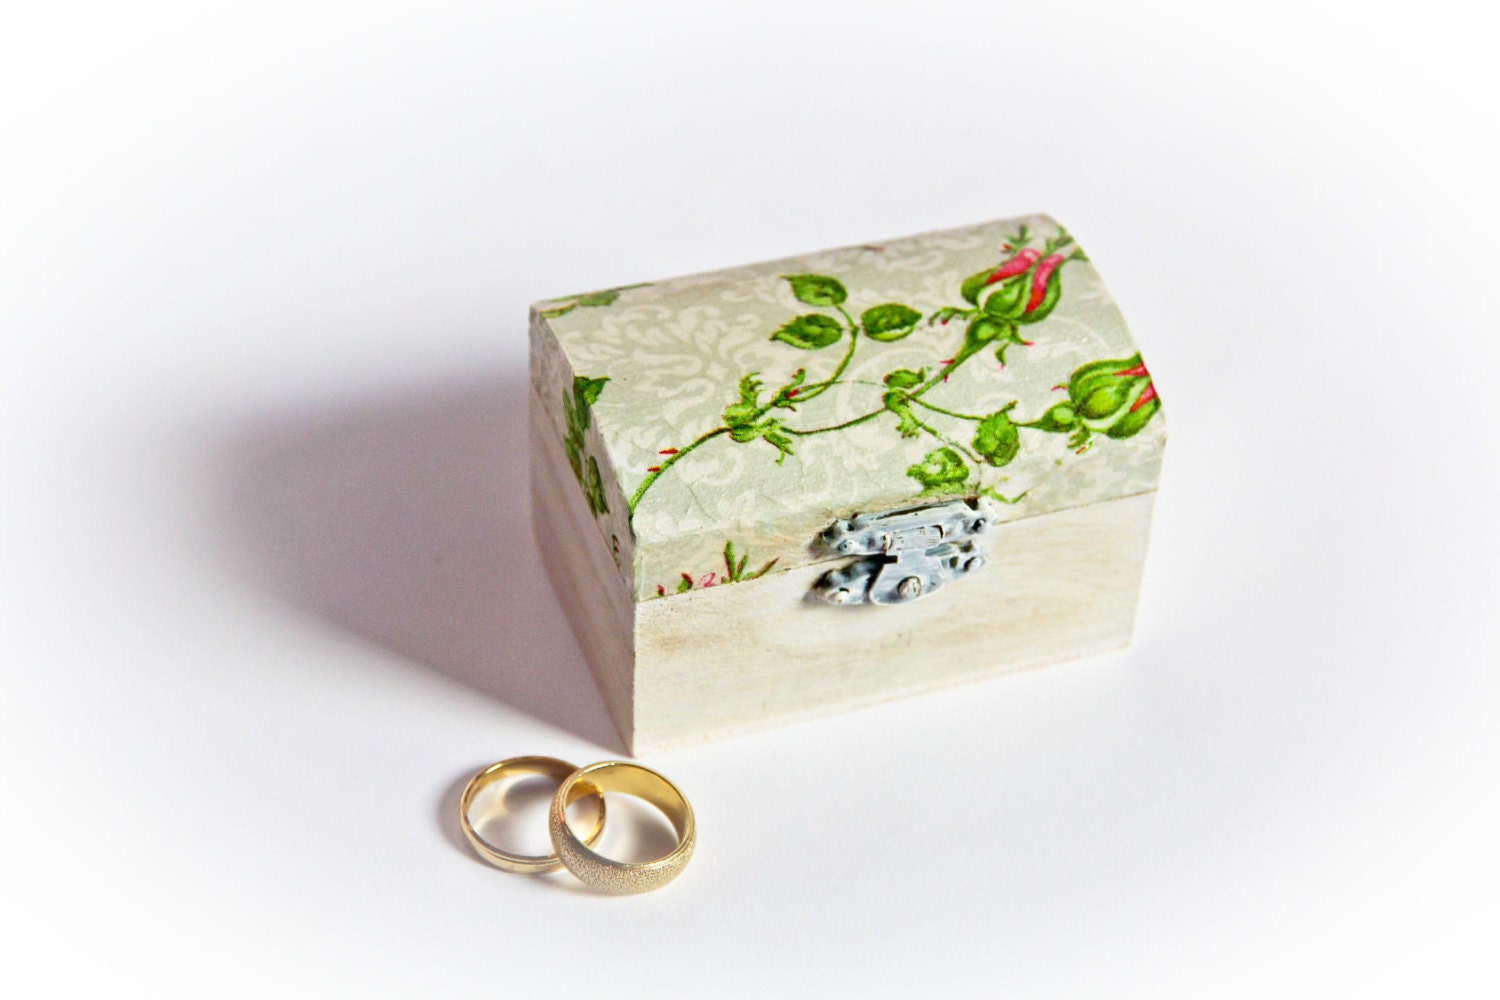 Natural Wooden Ring Bearer Wedding Box - Pillow Alternative - made in Israel Jewelry Box - Elegant, Floral, Rustic, Pastel - ShimmerPlace